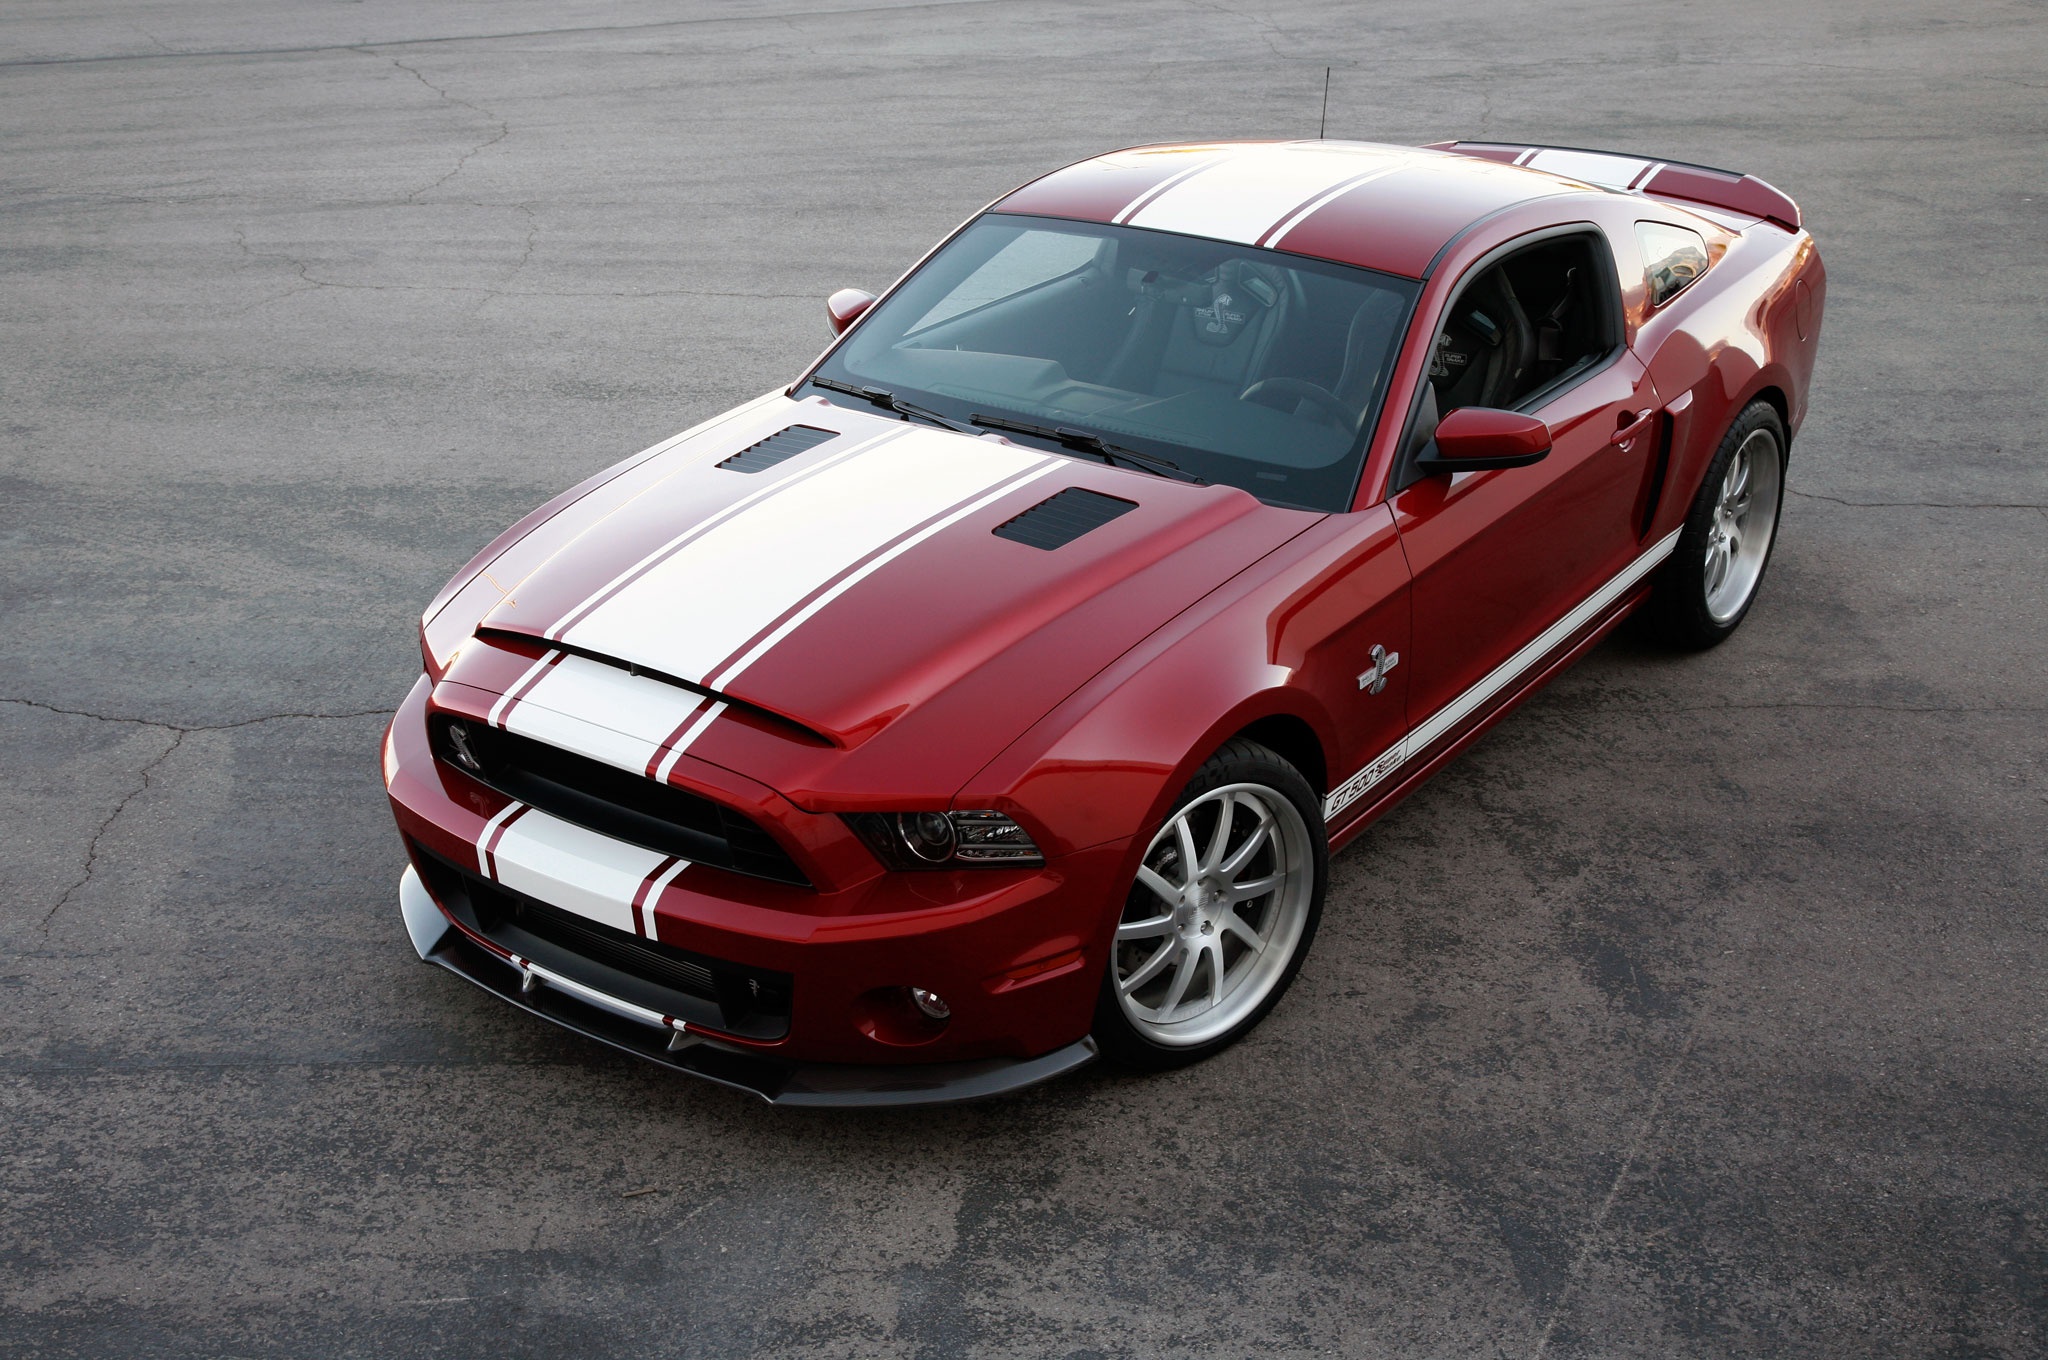 Car Ford Ford Mustang Ford Mustang Shelby Ford Mustang Shelby Gt500 Muscle Car Red Car 2048x1360